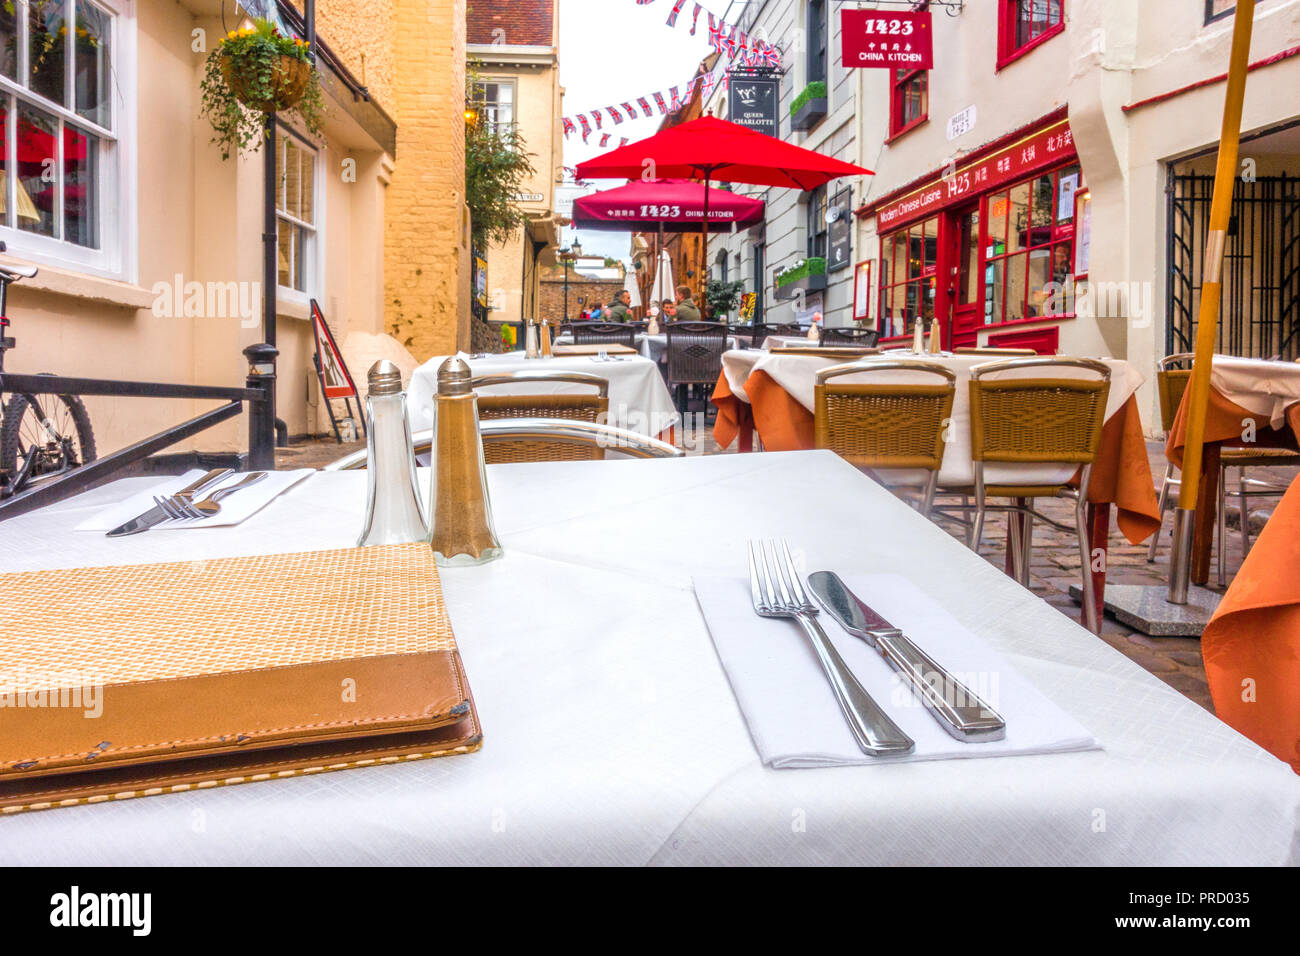 Outside tables laid out neatly with place settings at a restaurant in Church Lane, Windsor, UK. Stock Photo